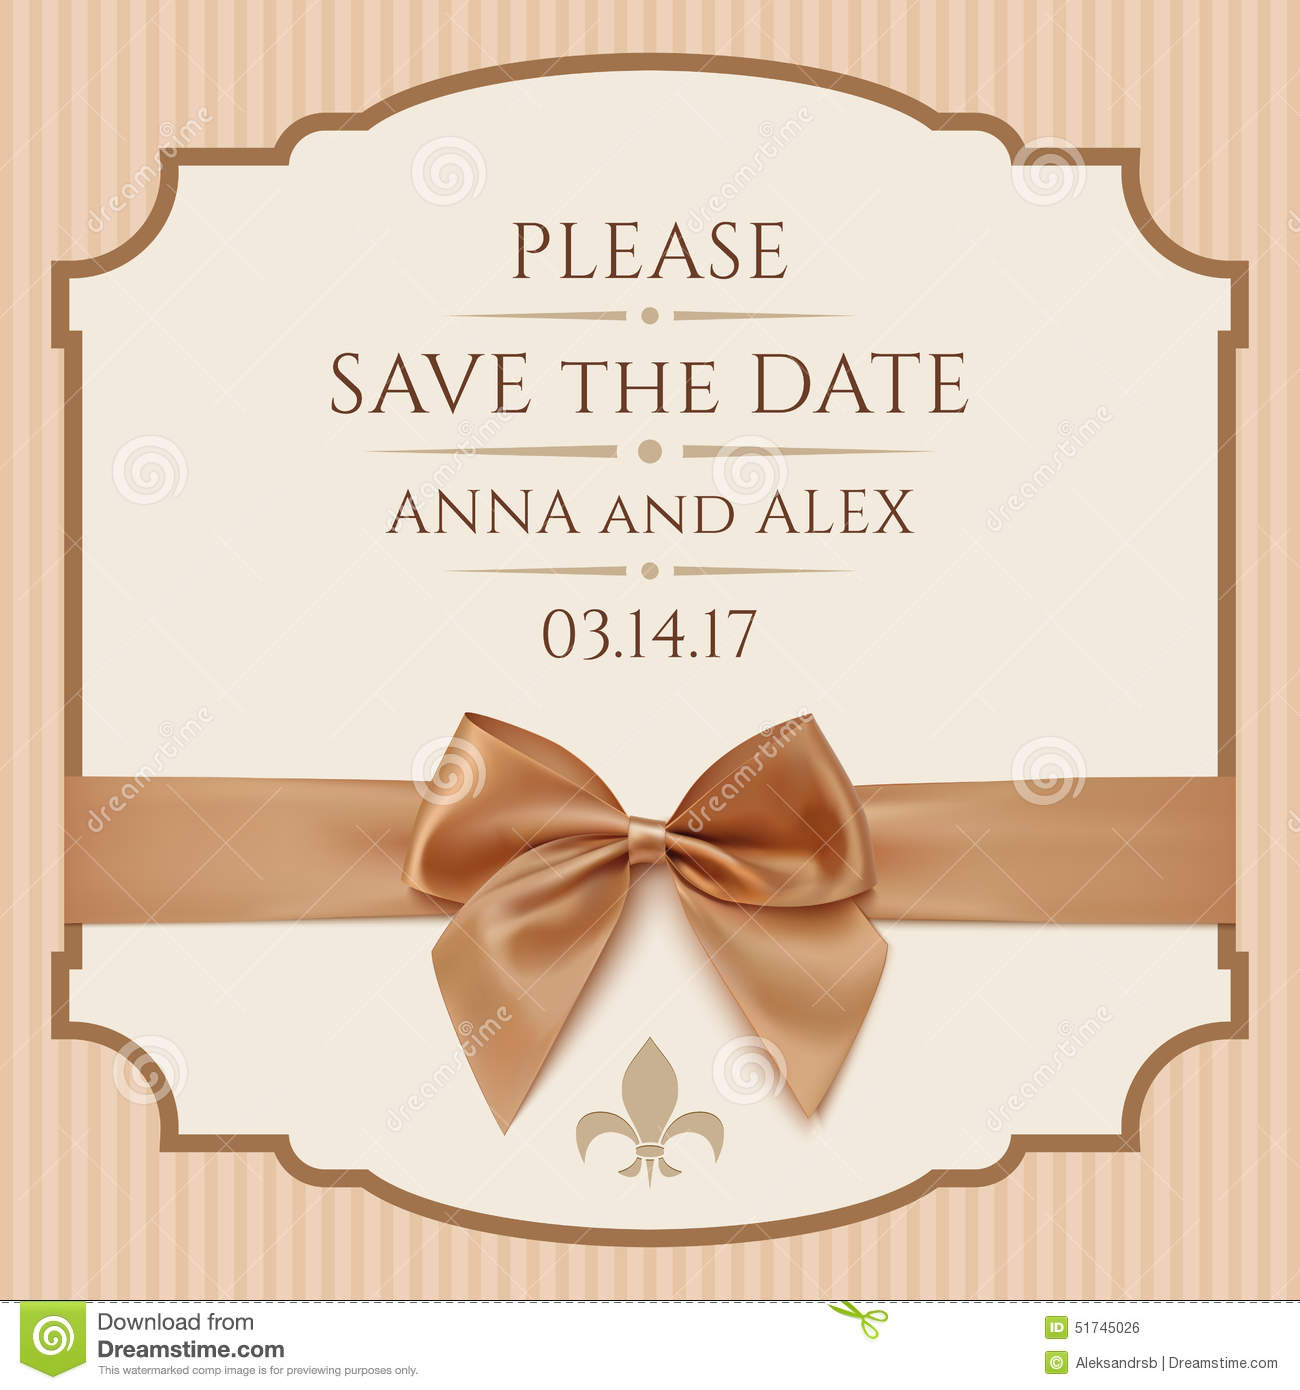 Save The Date, Wedding Invitation Card Stock Illustration Throughout Save The Date Cards Templates